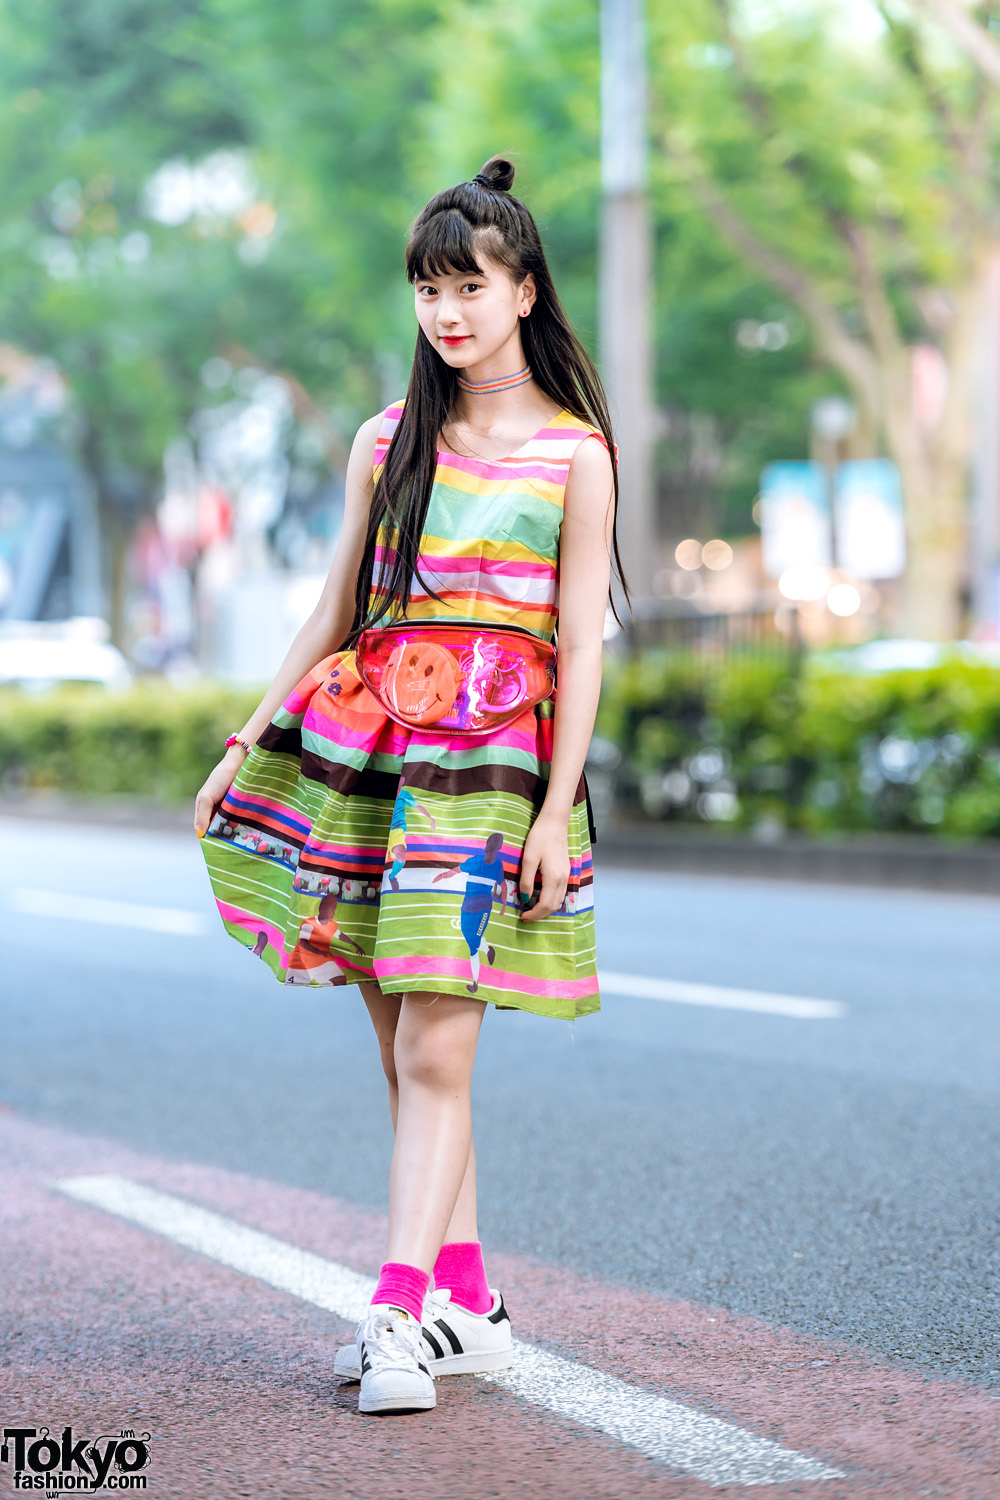 Japanese Pop Idol & Model A-pon in Harajuku w/ Colorful Dress, Adidas Sneakers & Spinns See Through Waist Bag